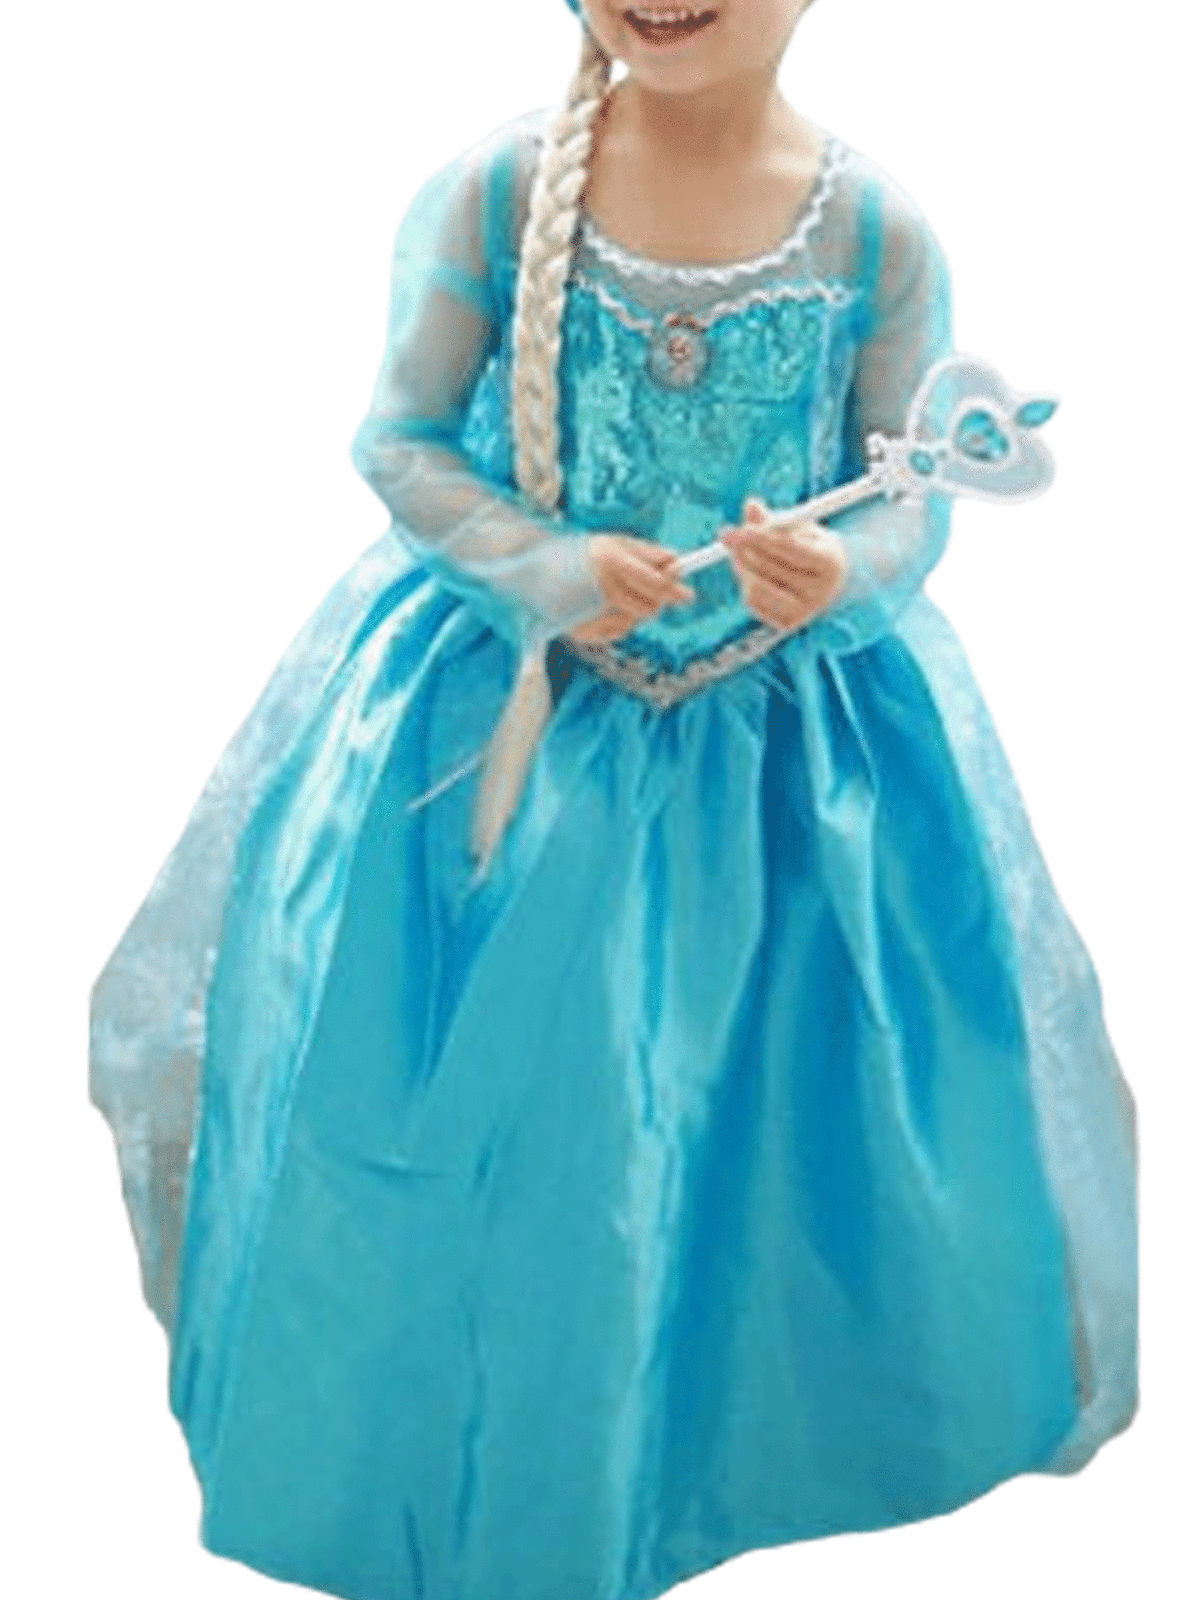 7/8..°•´¨`» FREE Shipping from US! «´¨`• Princess Frozen Fever Elsa Costume 